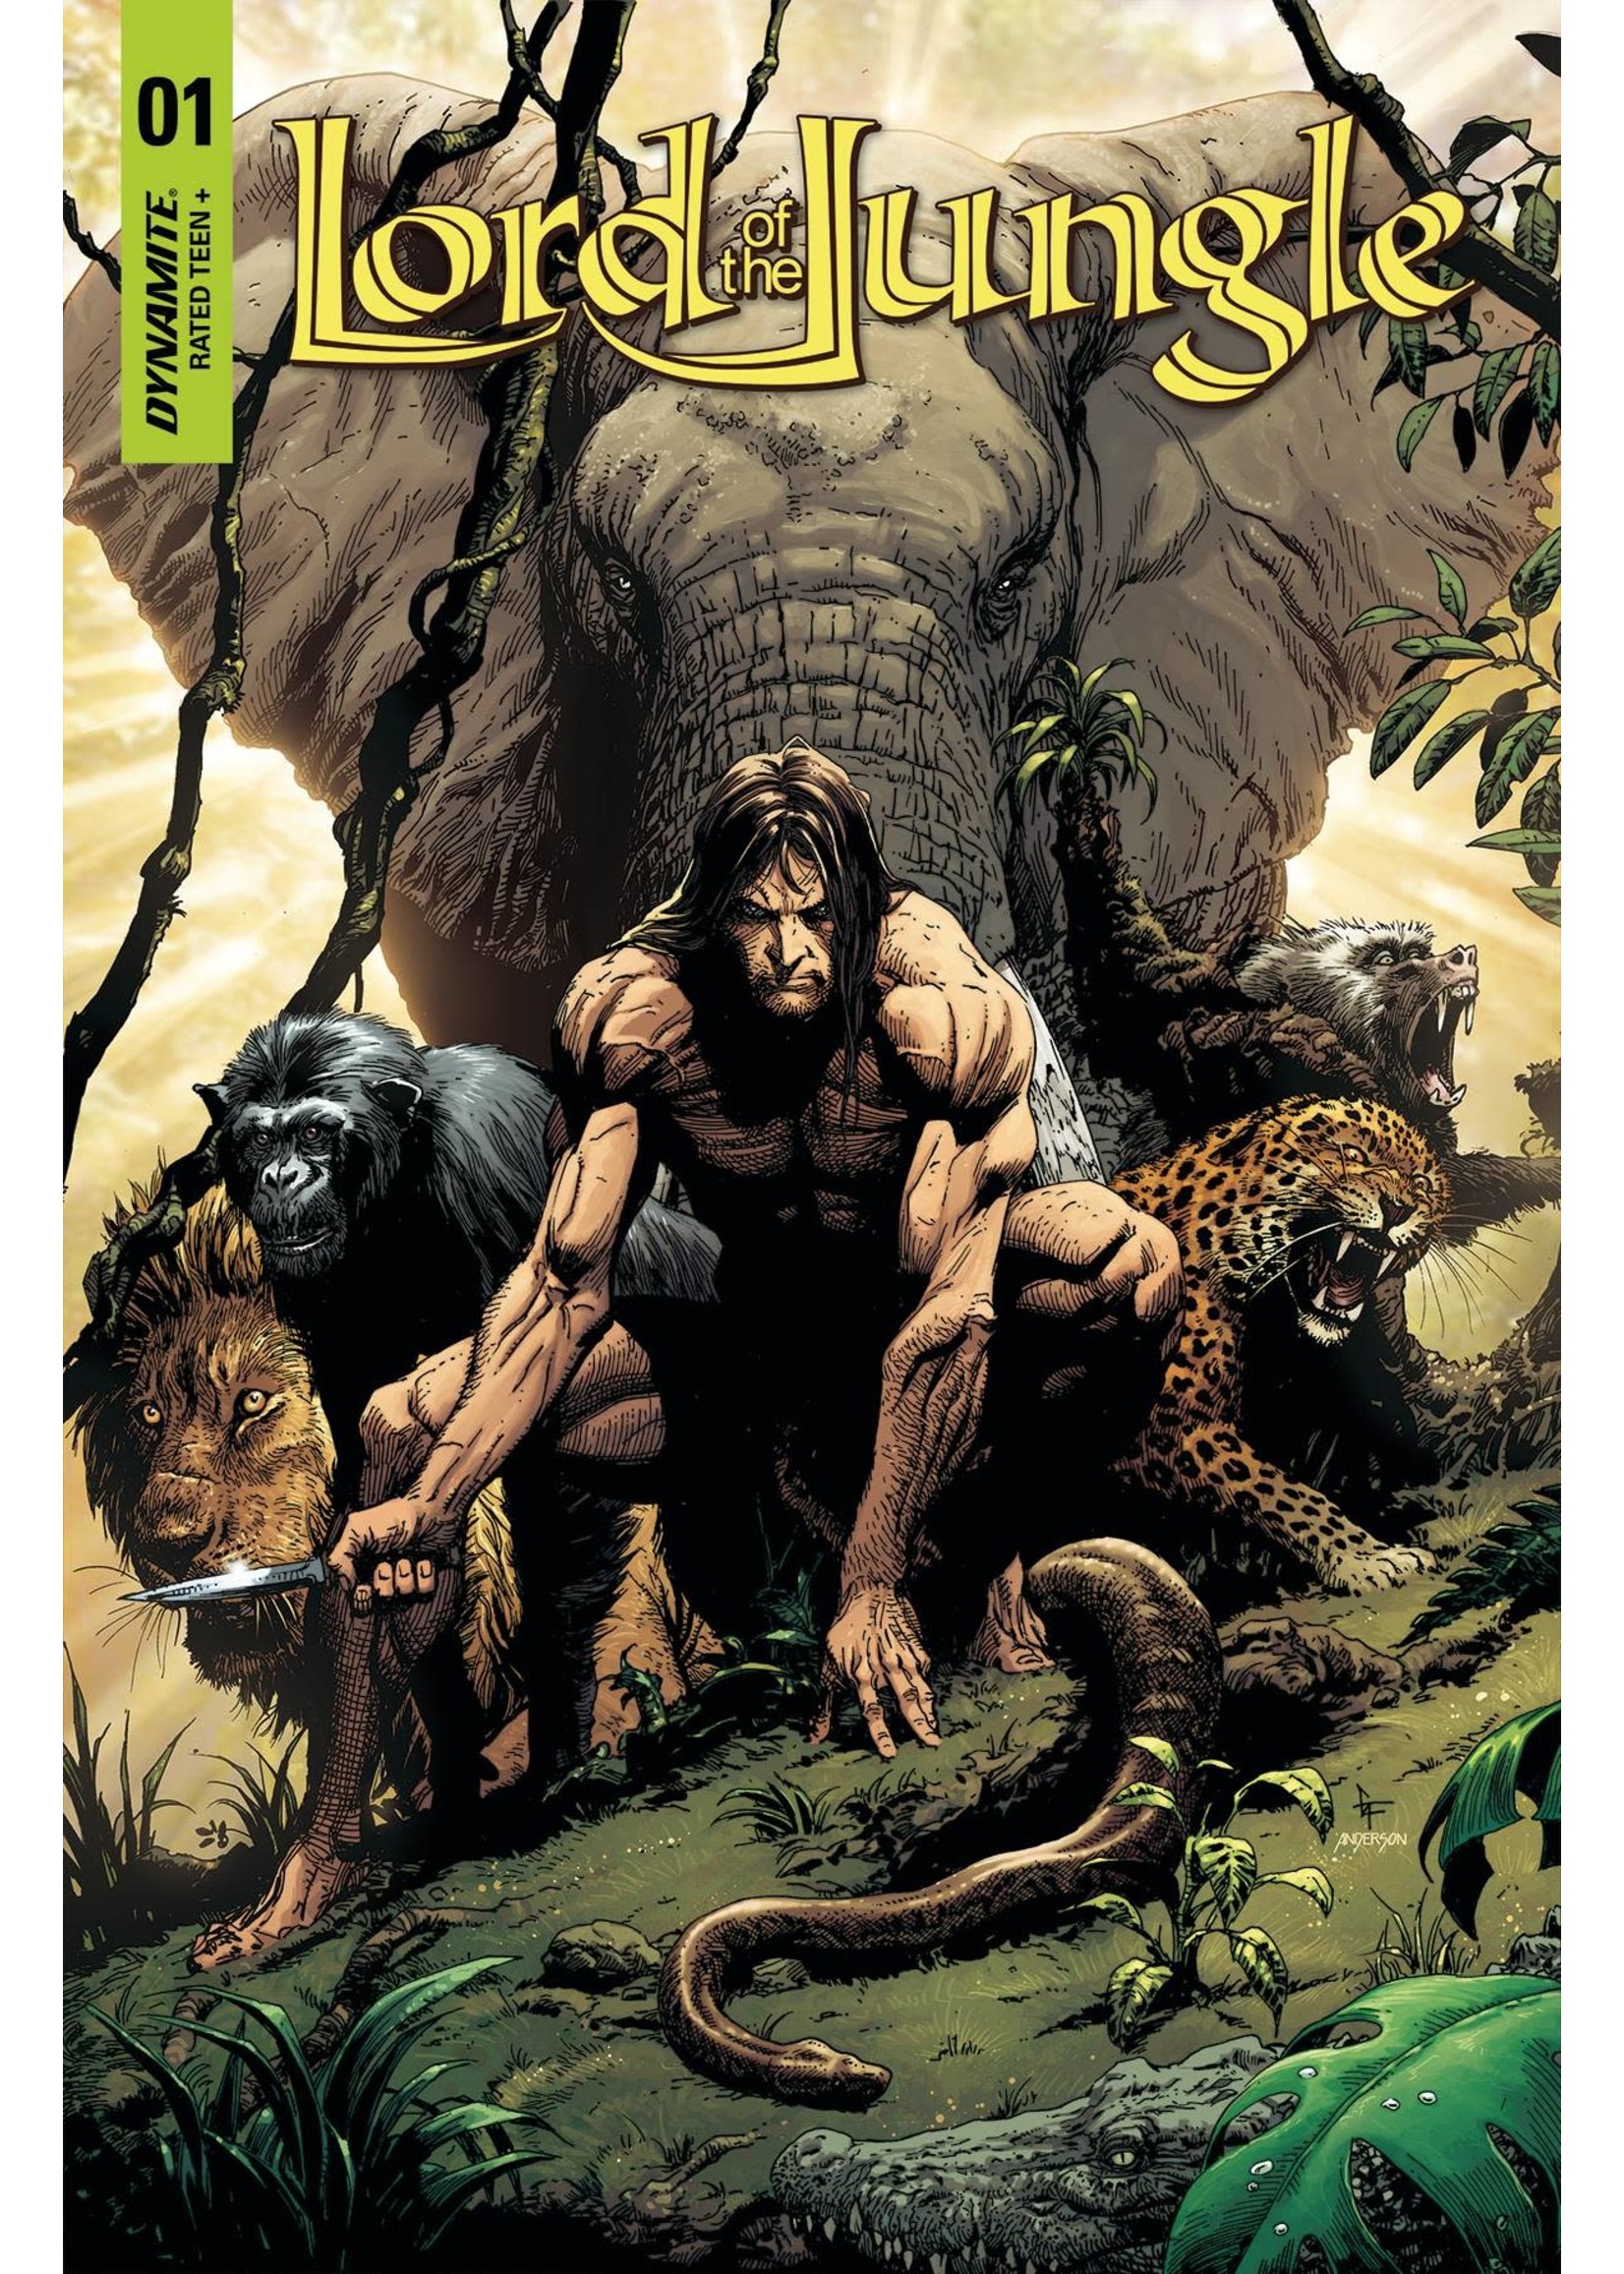 DYNAMITE LORD OF THE JUNGLE #1 CVR A FRANK